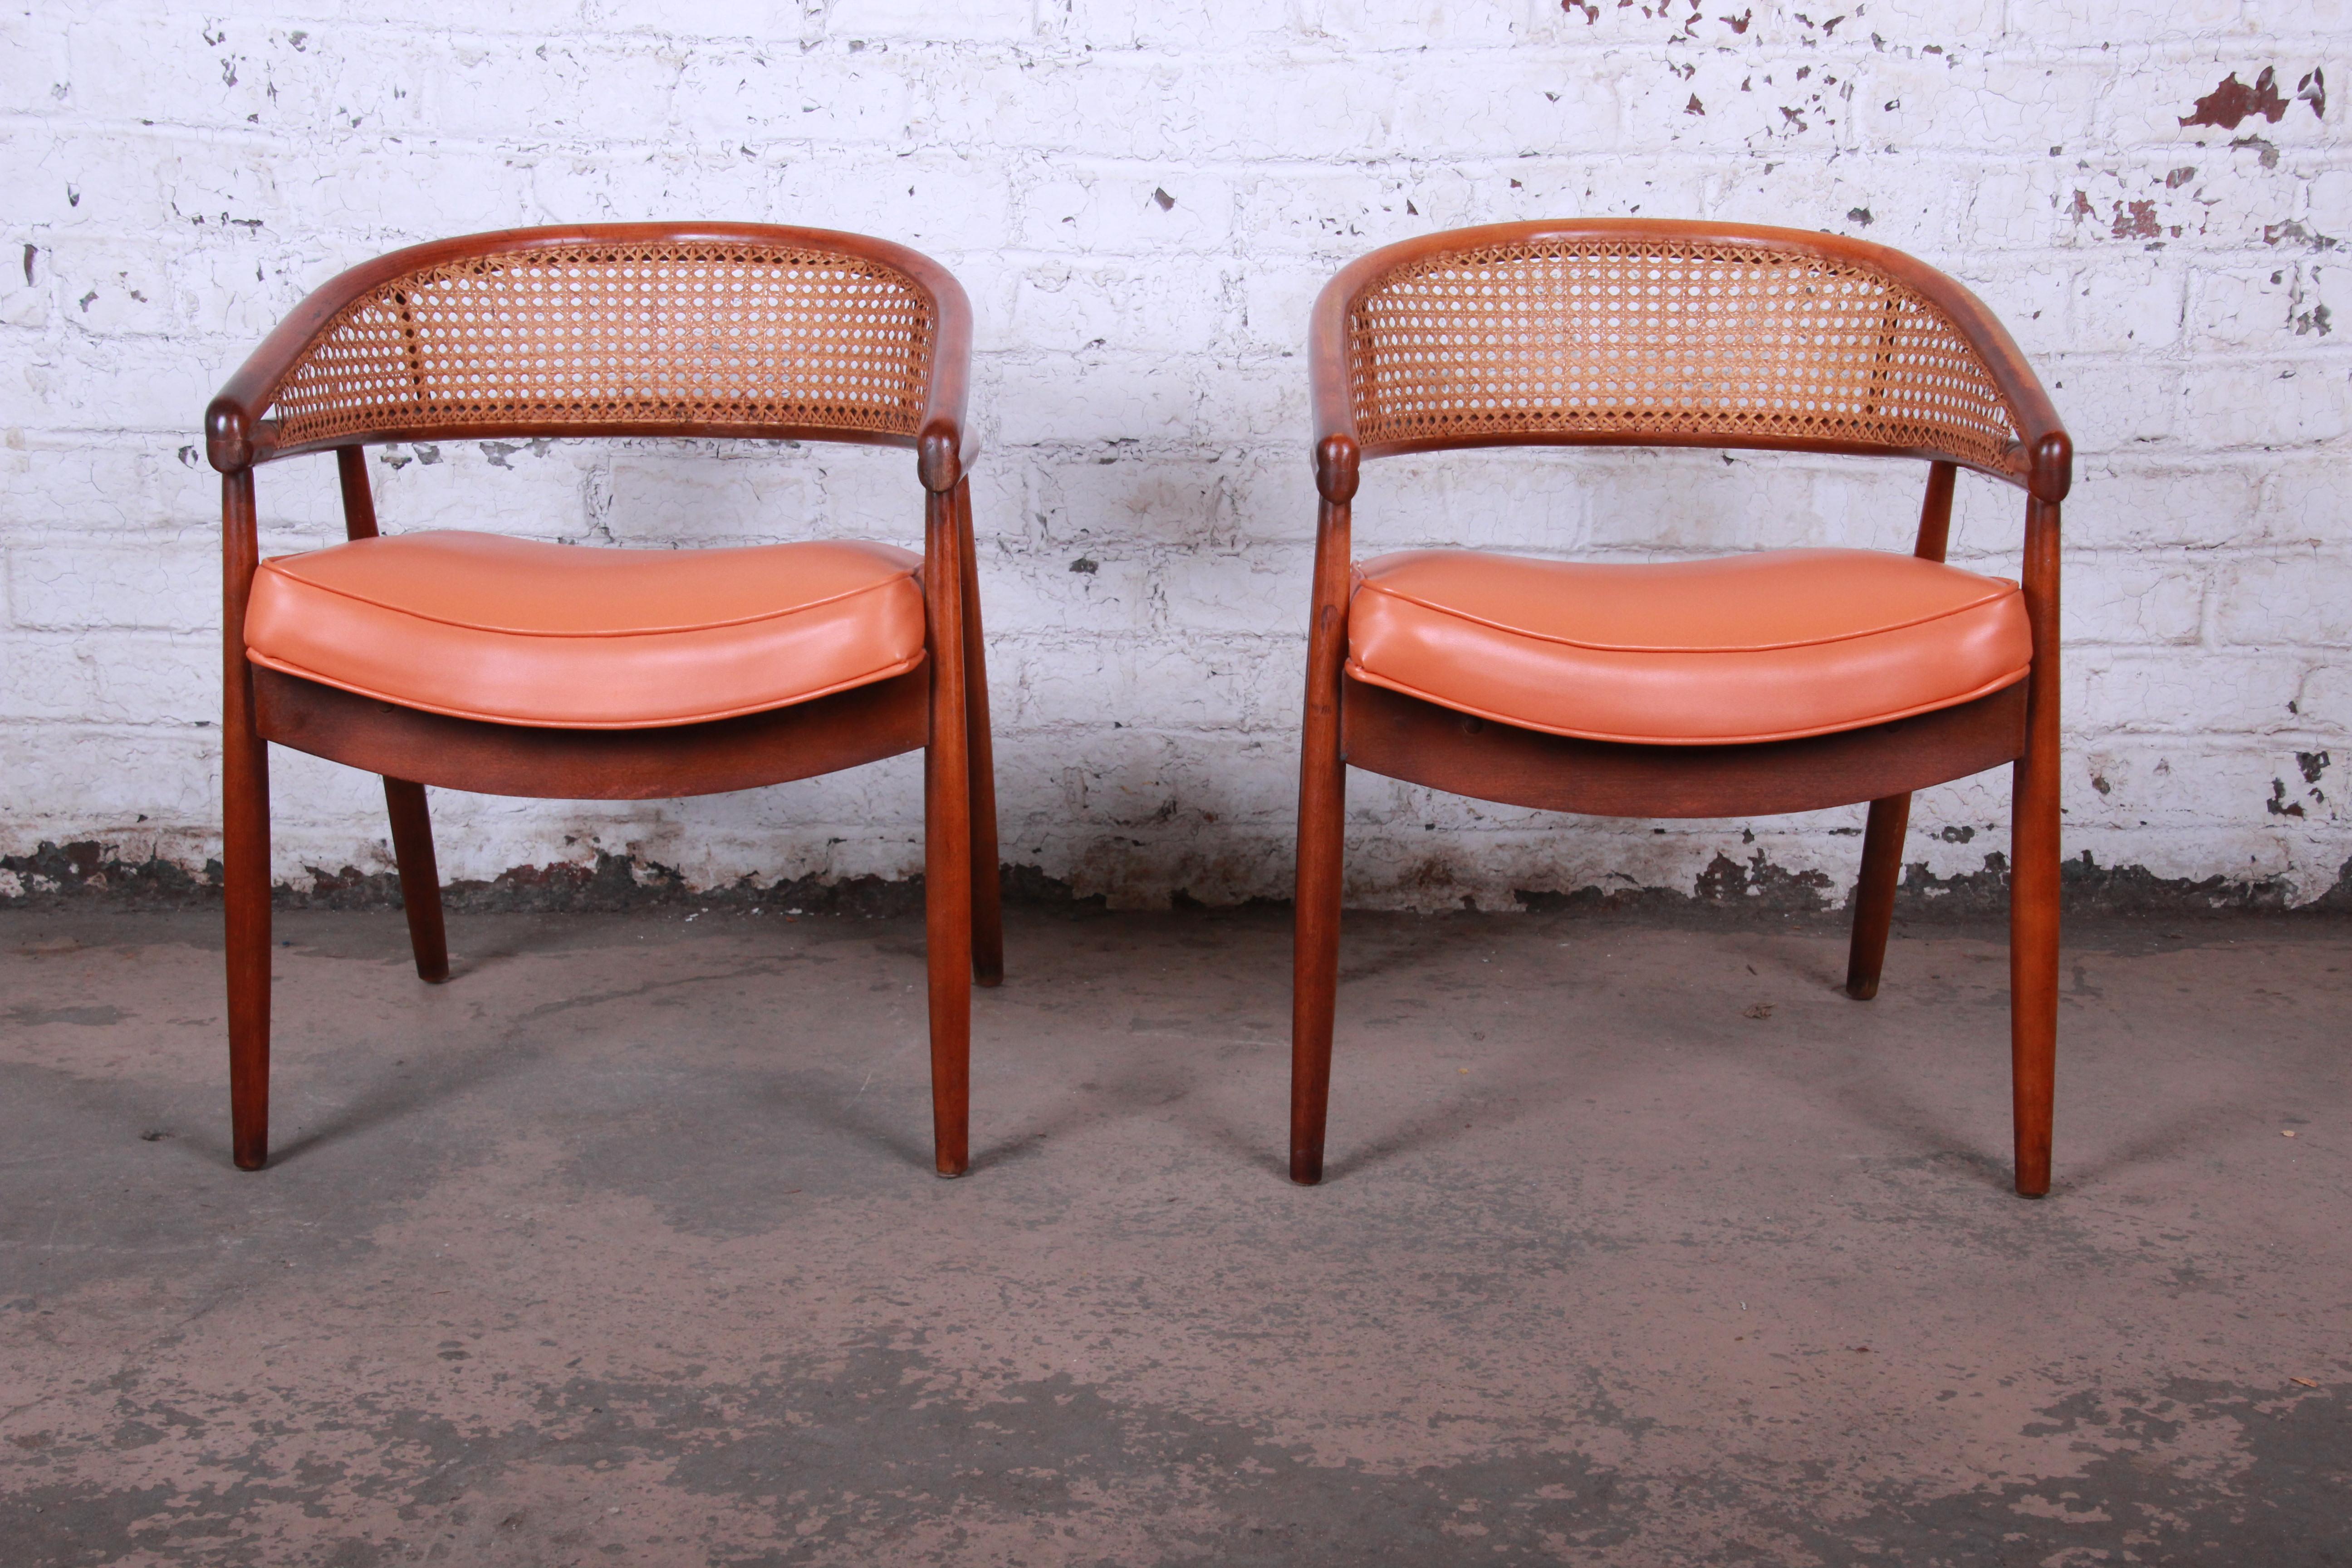 An exceptional pair of James Mont style bent beech wood and cane back club chairs. Mont famously used this design in Nat King Coles' Miami Penthouse project. The chairs feature a stunning bent wood design and original orange naugahyde upholstery.